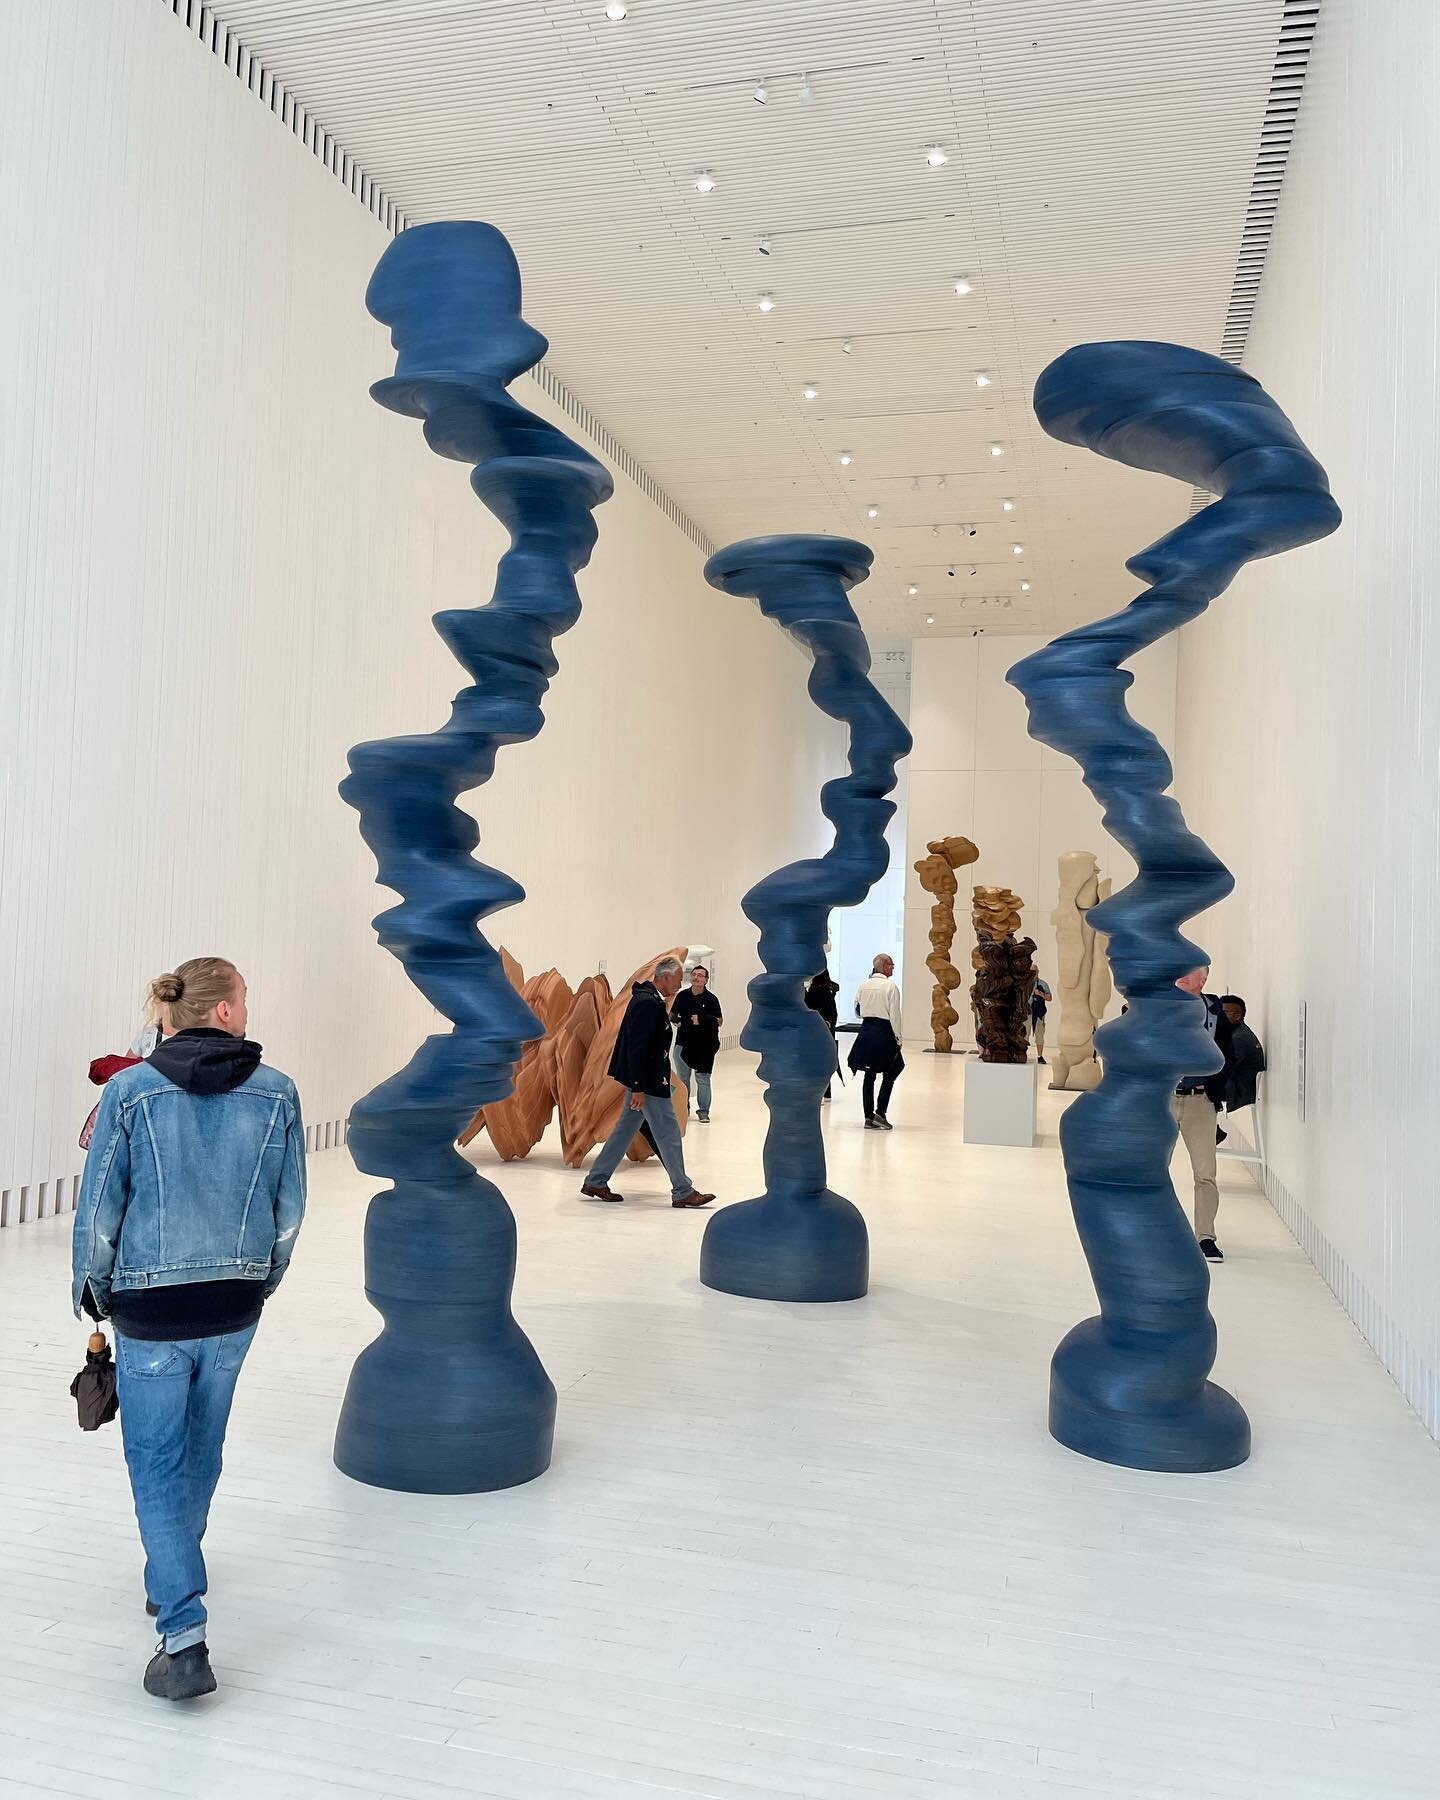 @kristjaan &amp; Tony Cragg.

&ldquo;Points of View&rdquo;

One of this summer&rsquo;s inspiring art experiences.

#kistefosmuseet #tonycragg #pointsofview